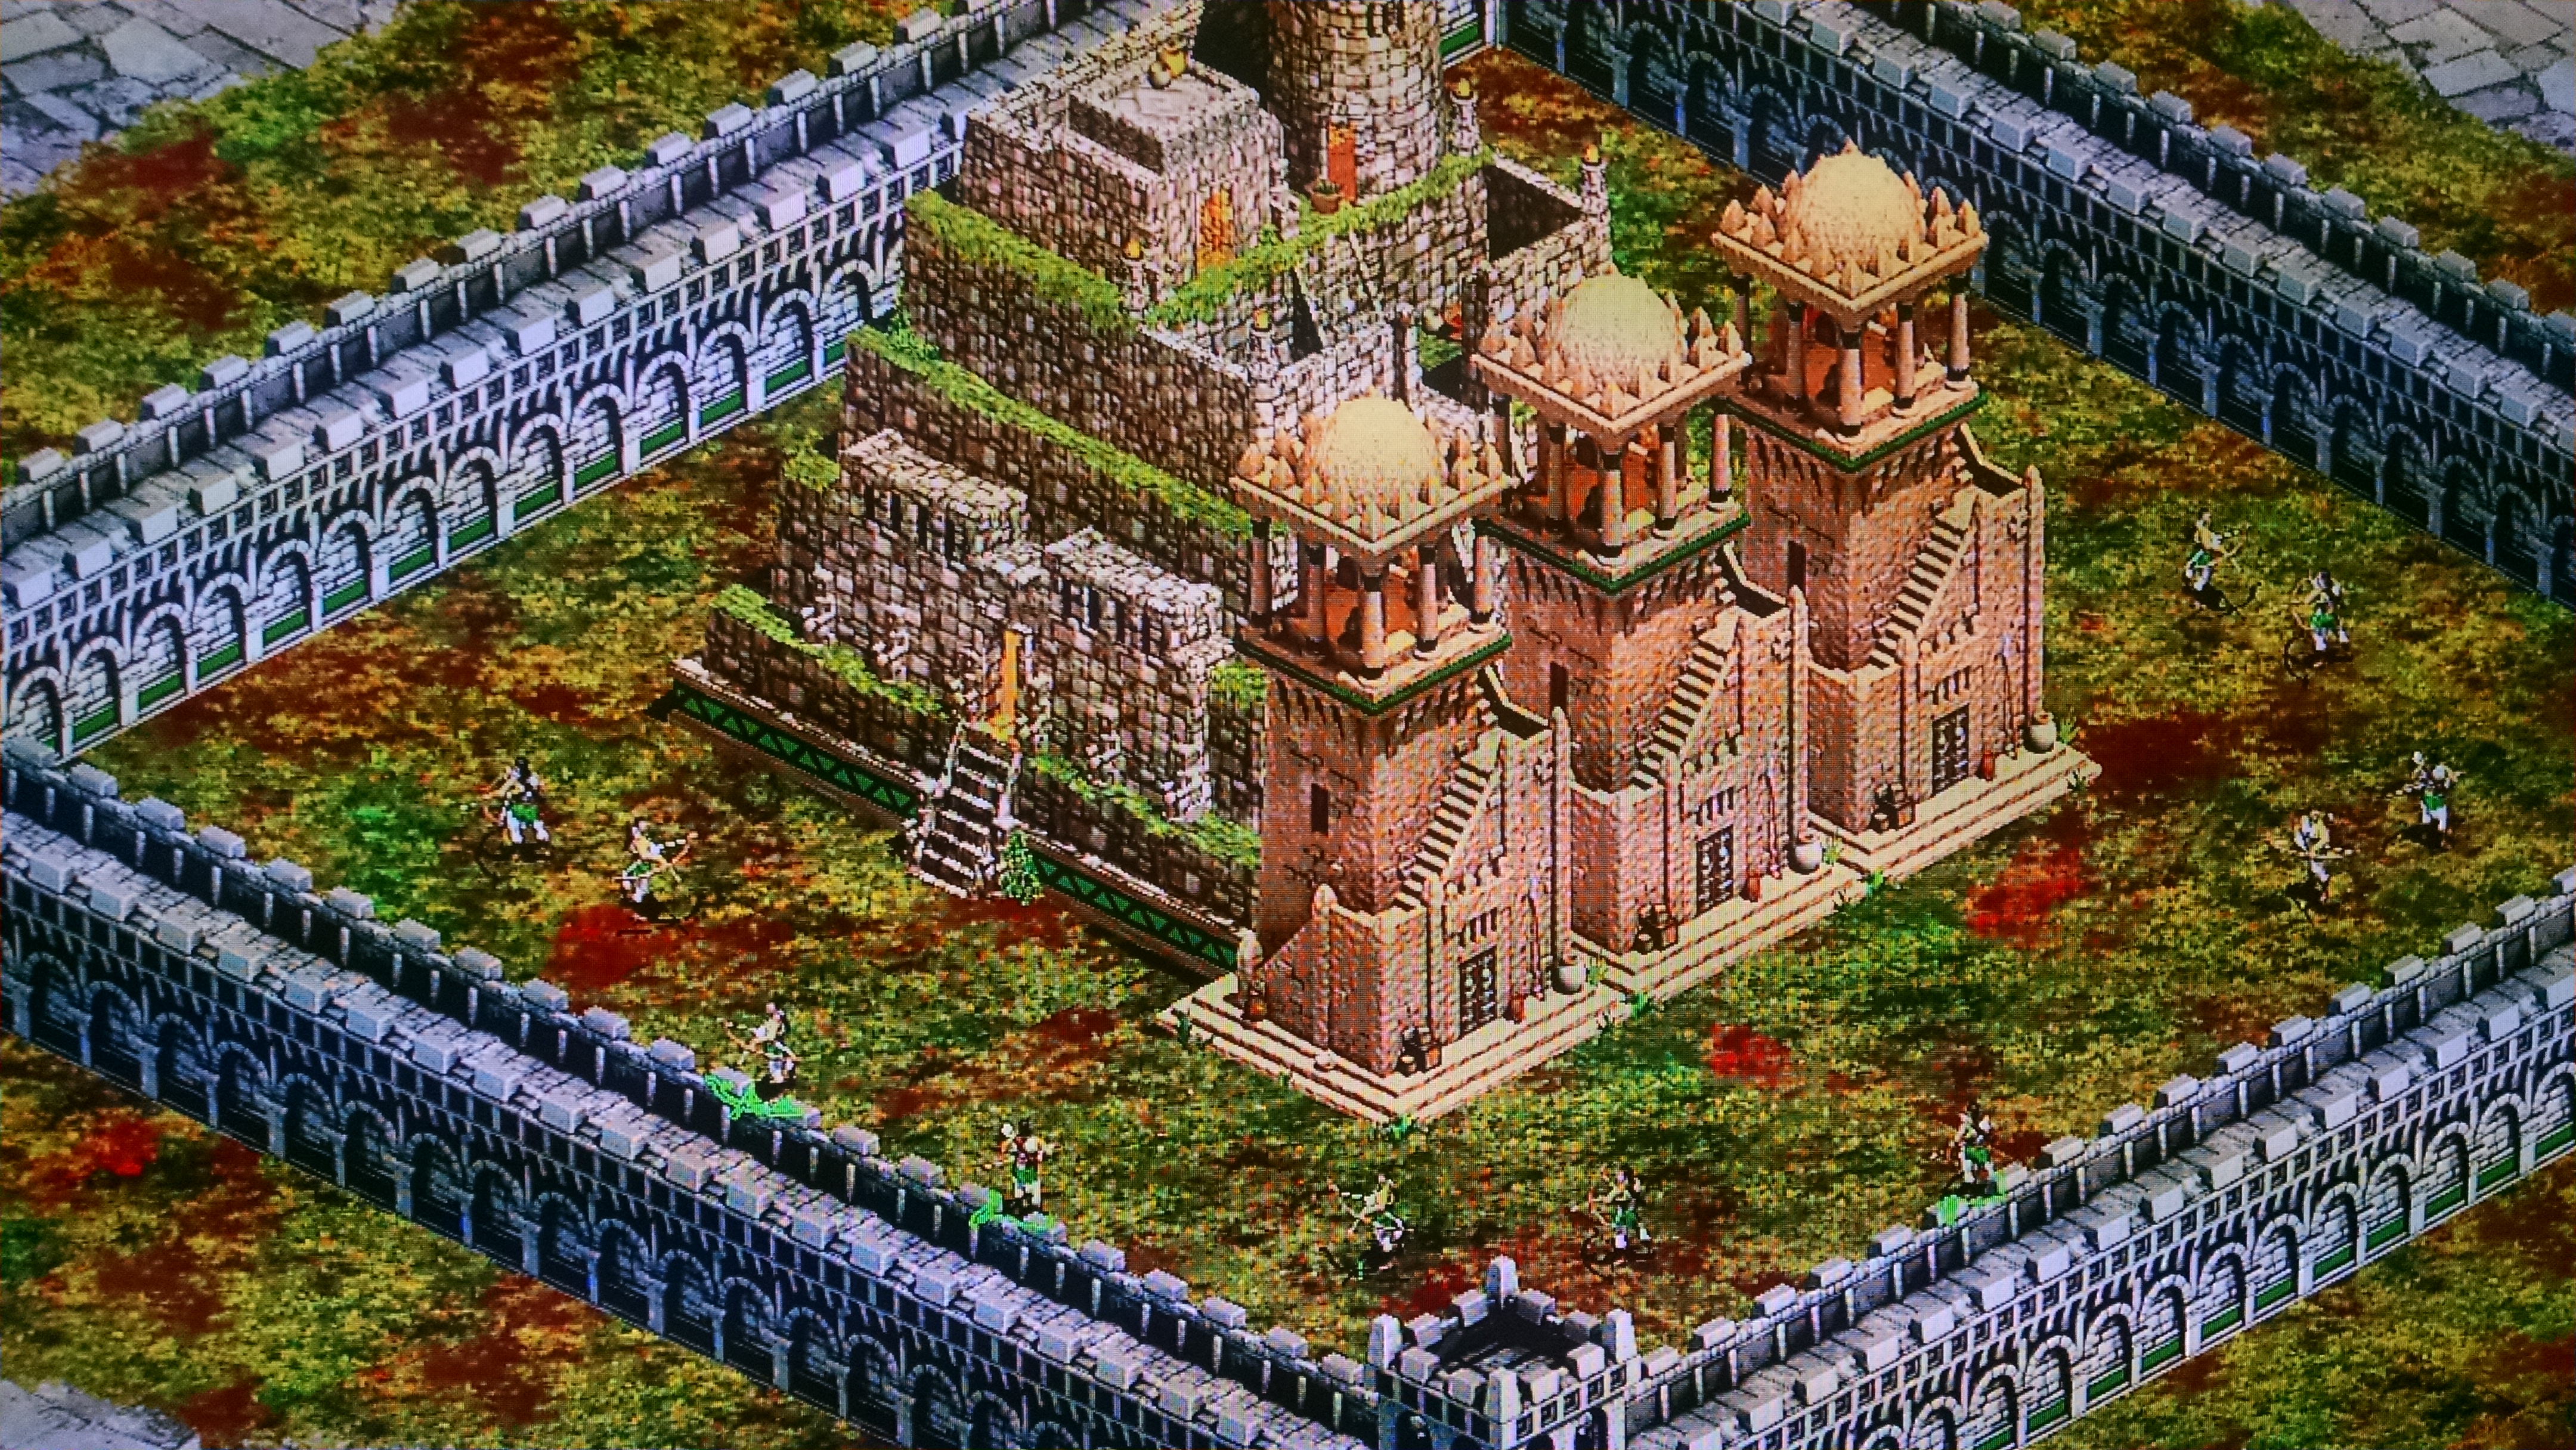 age of empires 2 hd factions